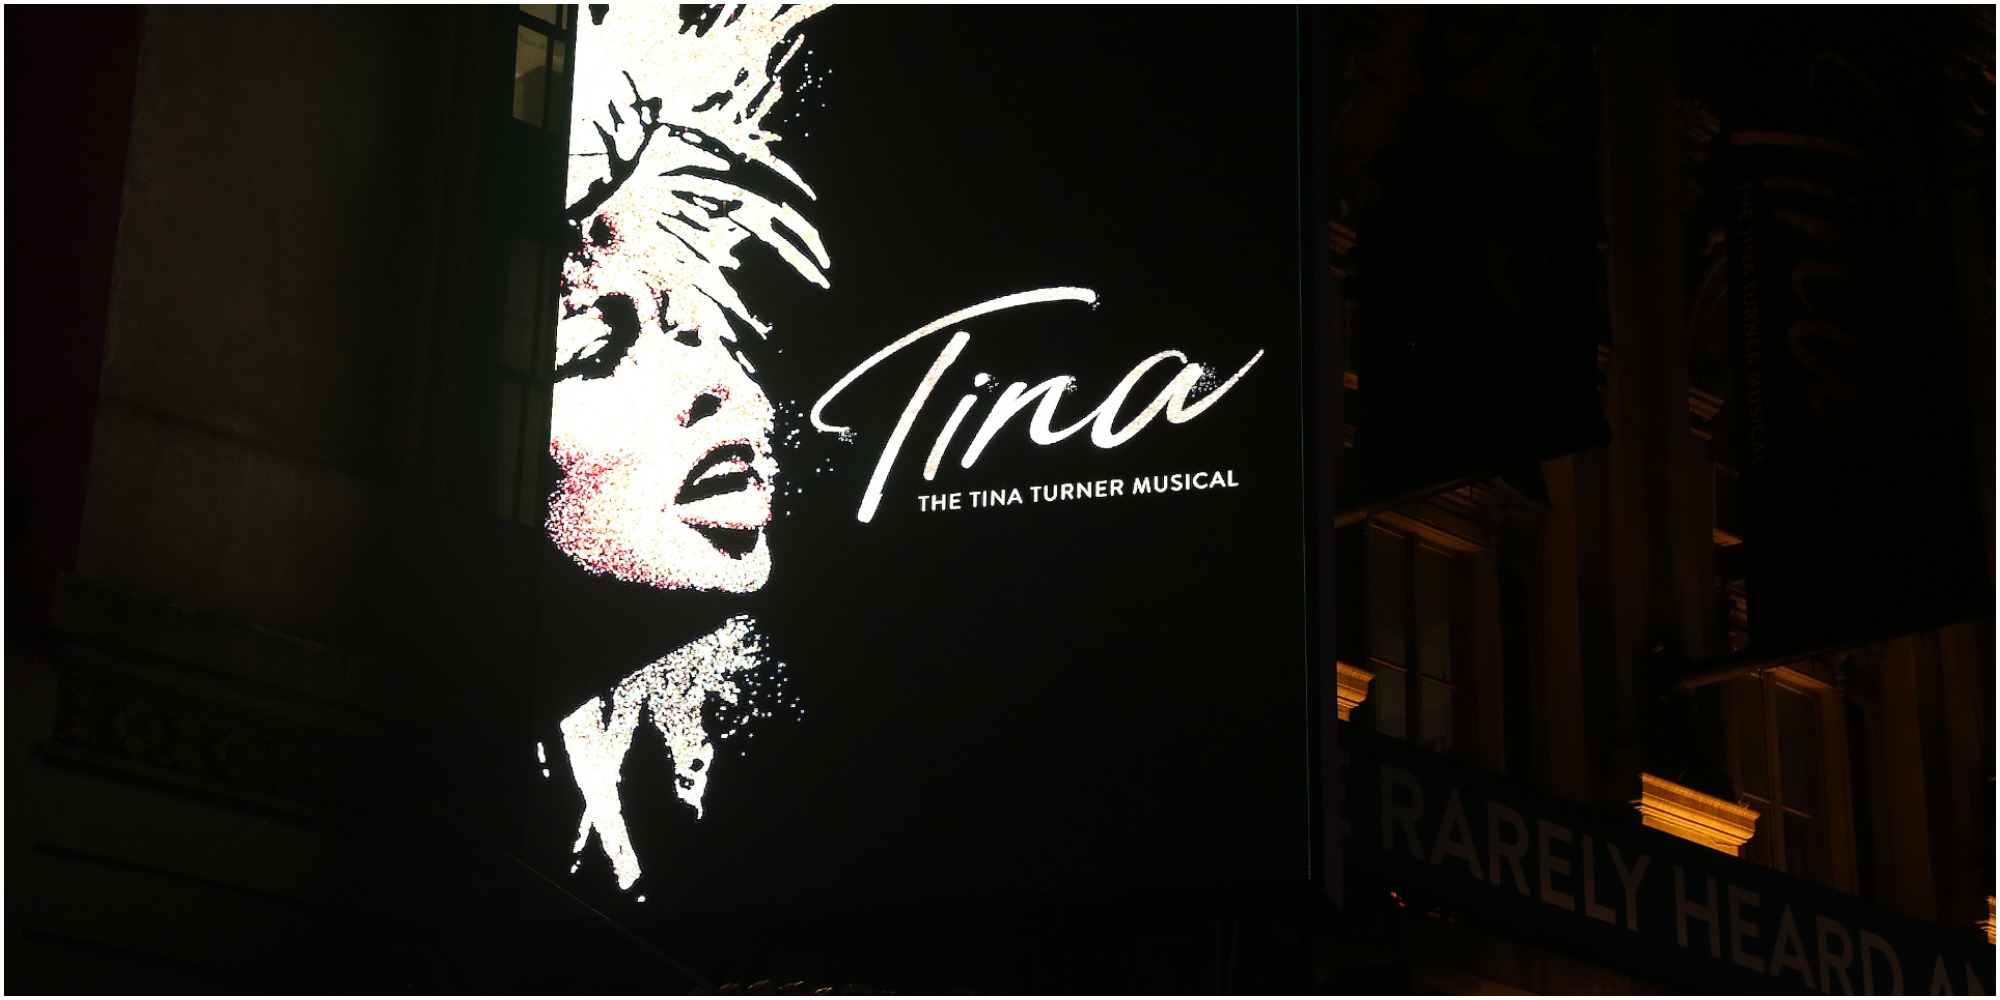 The Broadway marquee for Tina: The Tina Turner Musical, nominated for 12 Tony Awards.